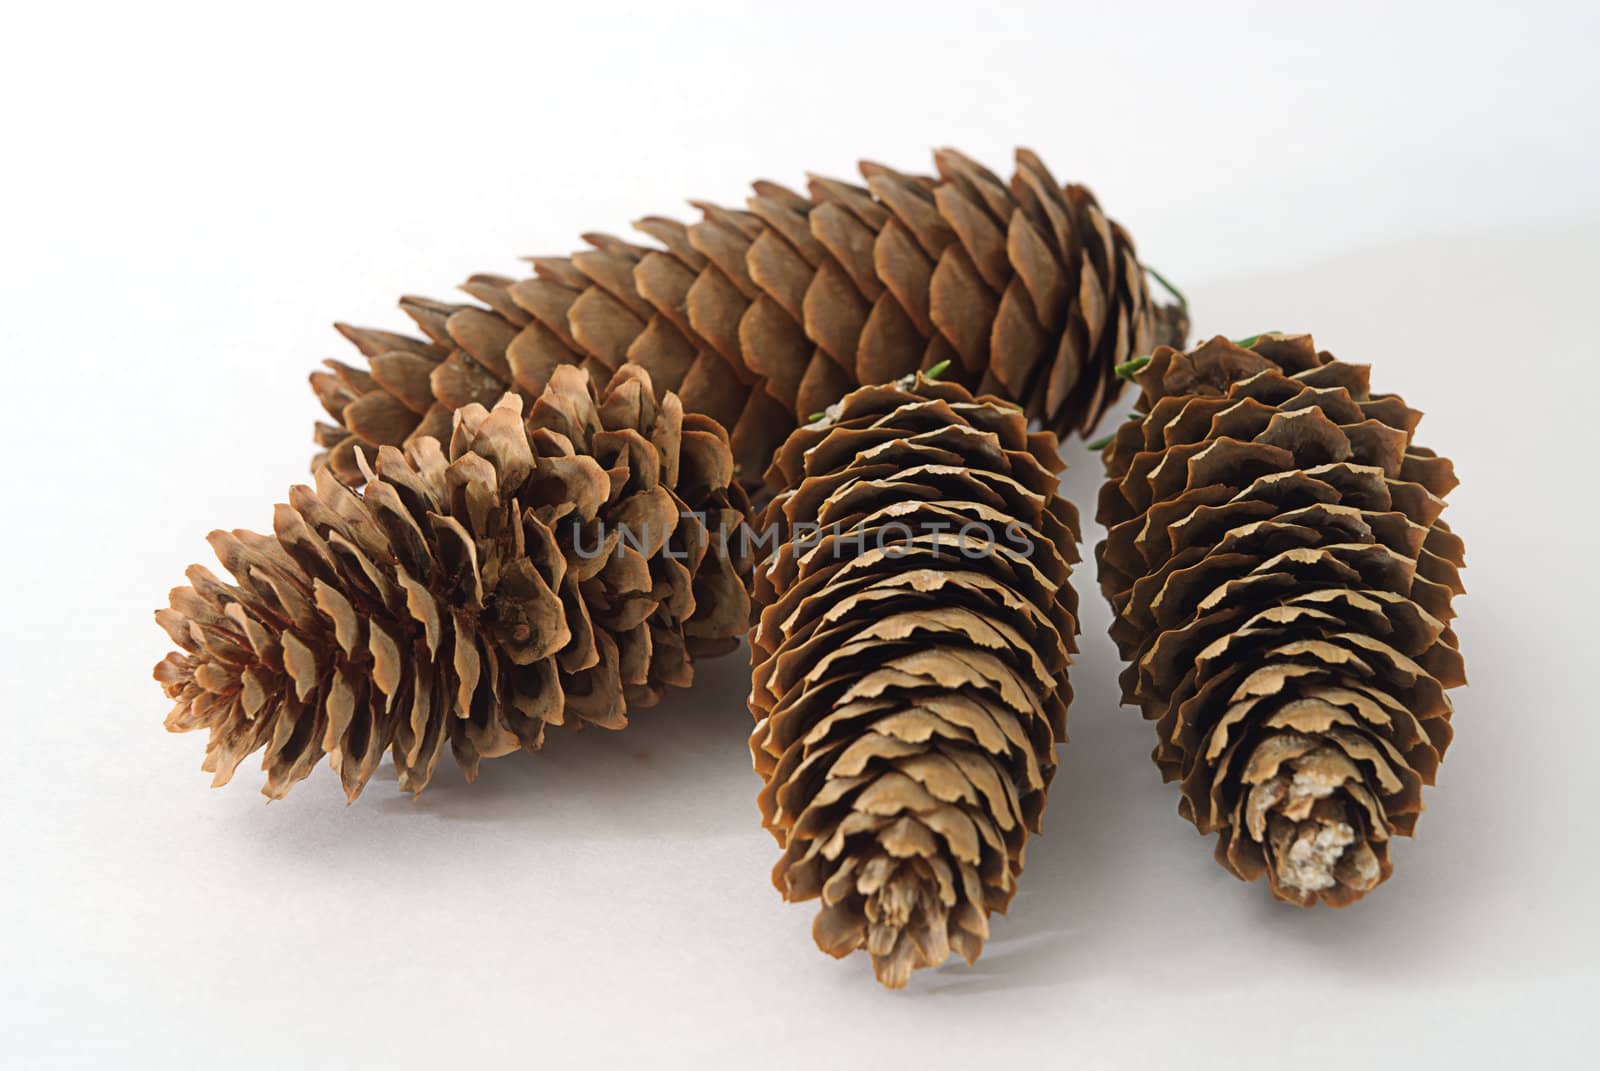 fir cones by vikinded